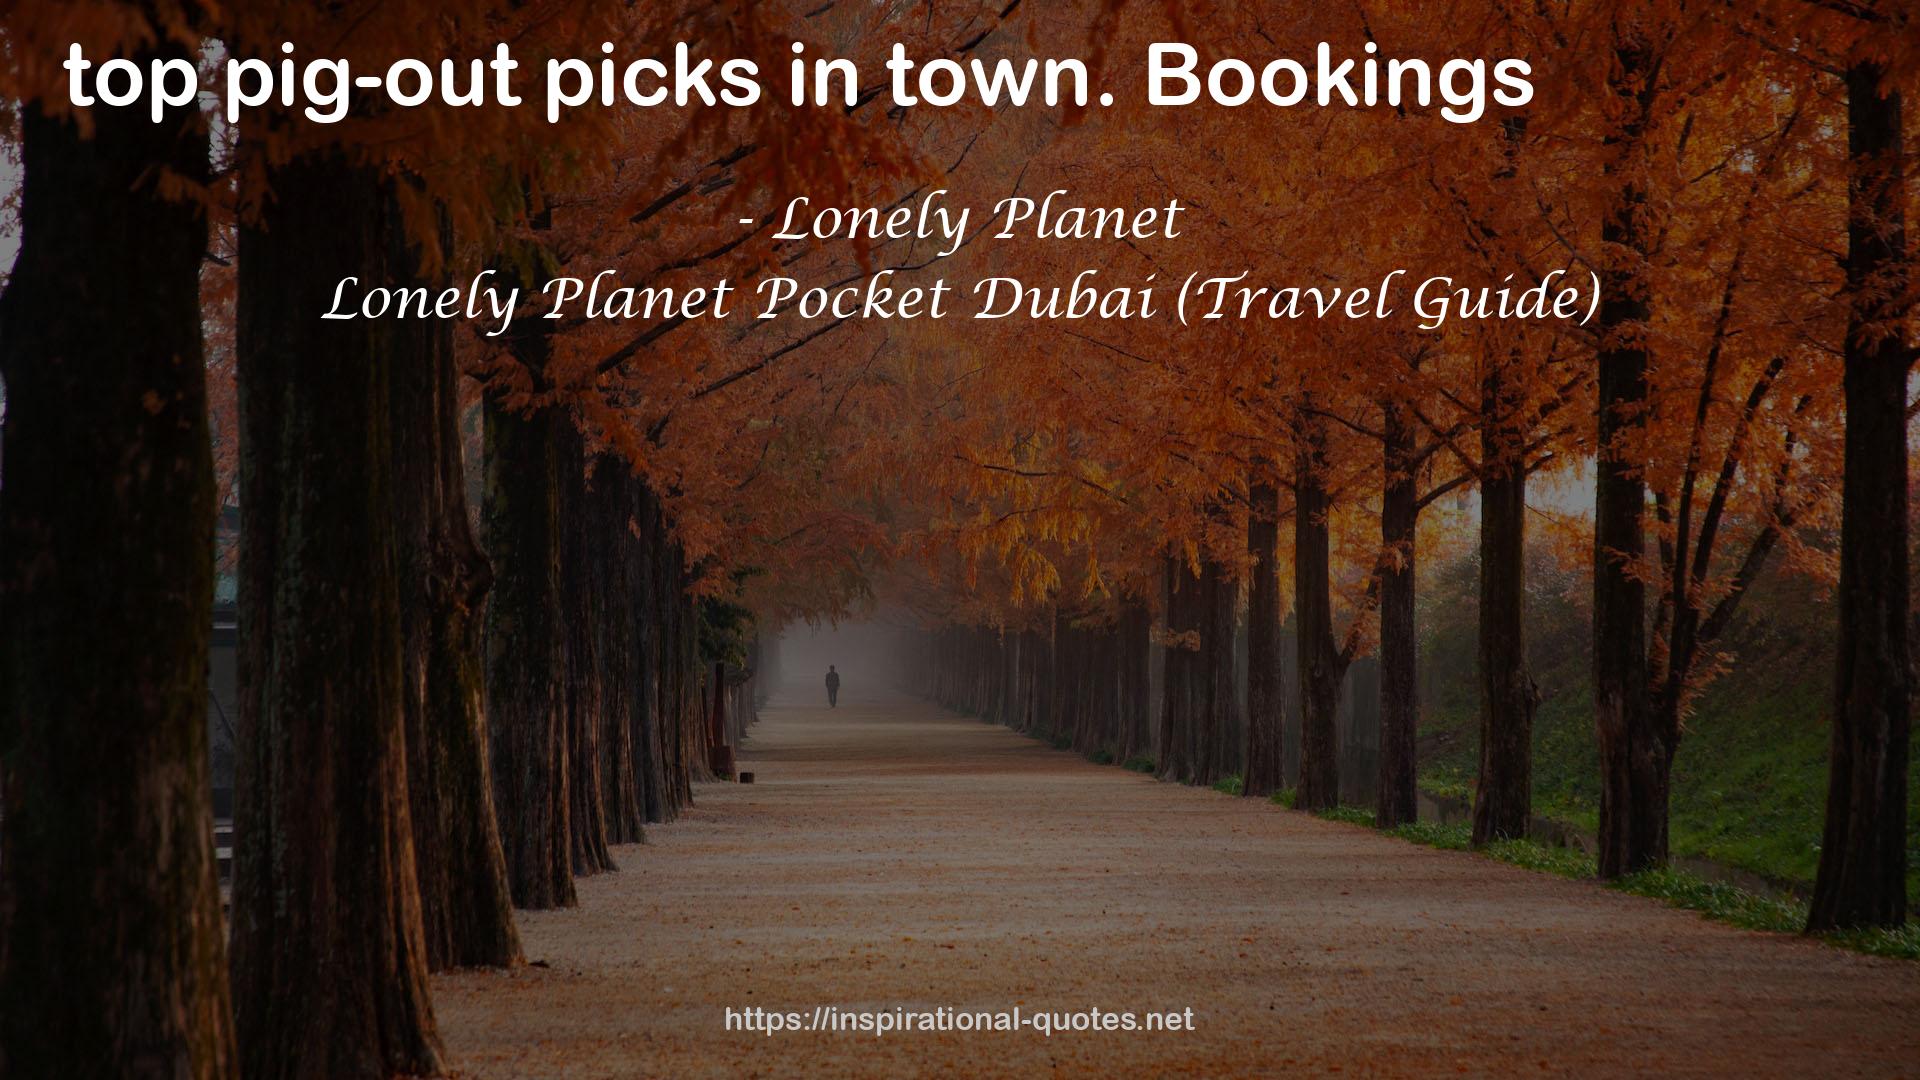 Lonely Planet Pocket Dubai (Travel Guide) QUOTES